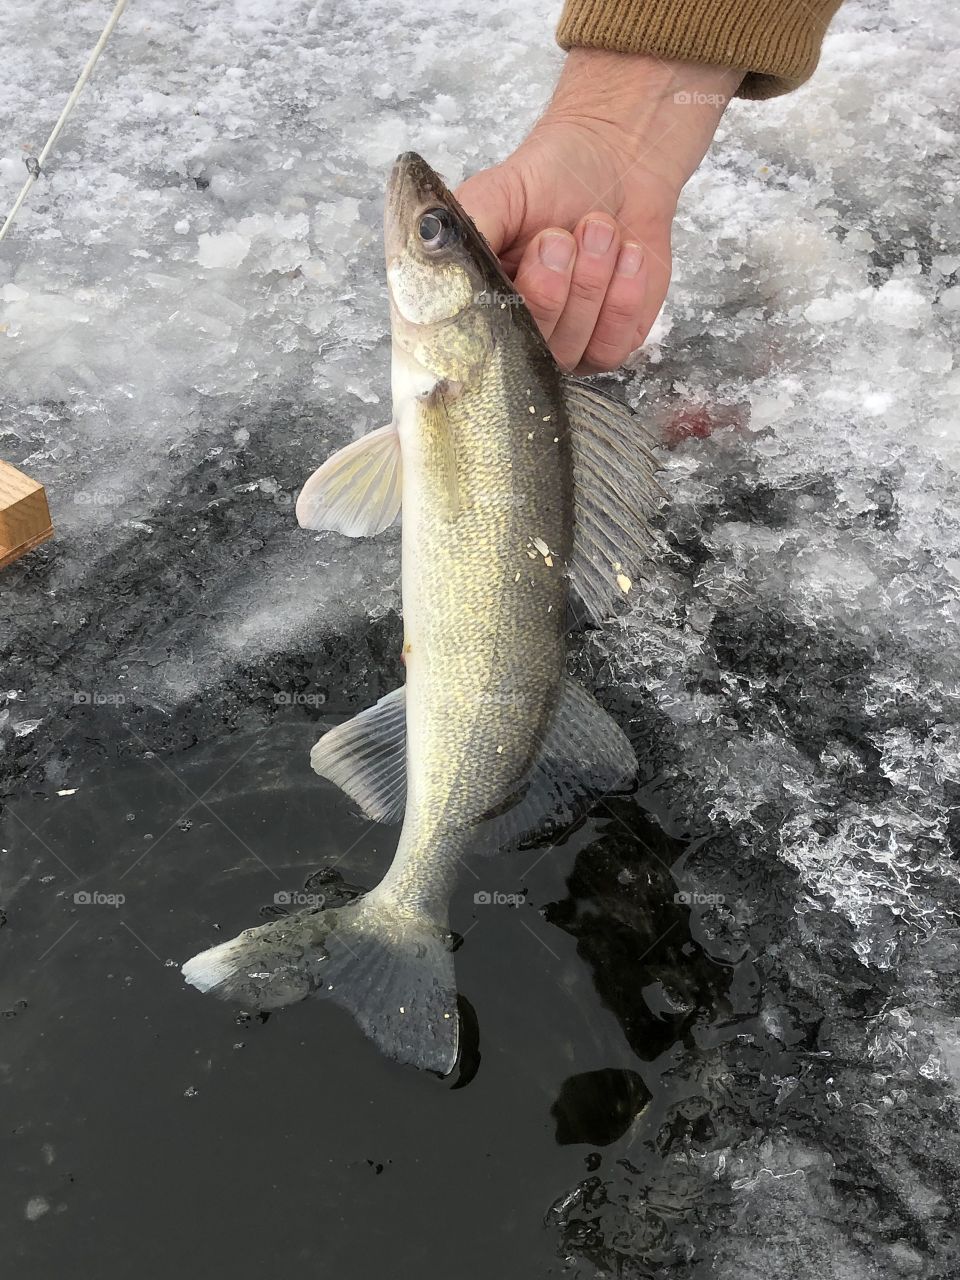 Walleye being released to the lake